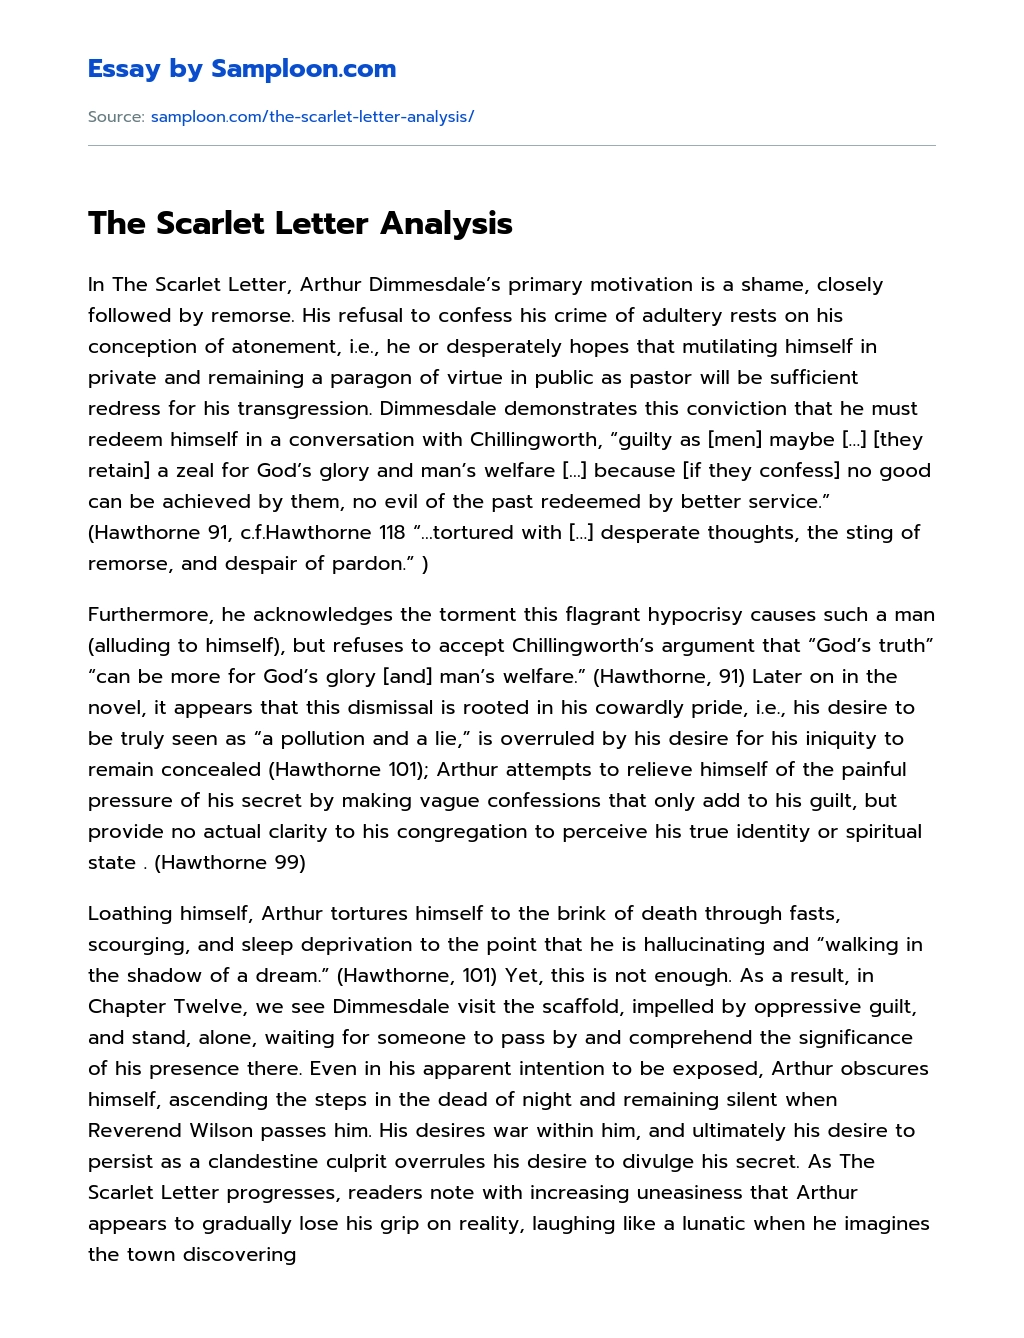 The Scarlet Letter Analysis essay